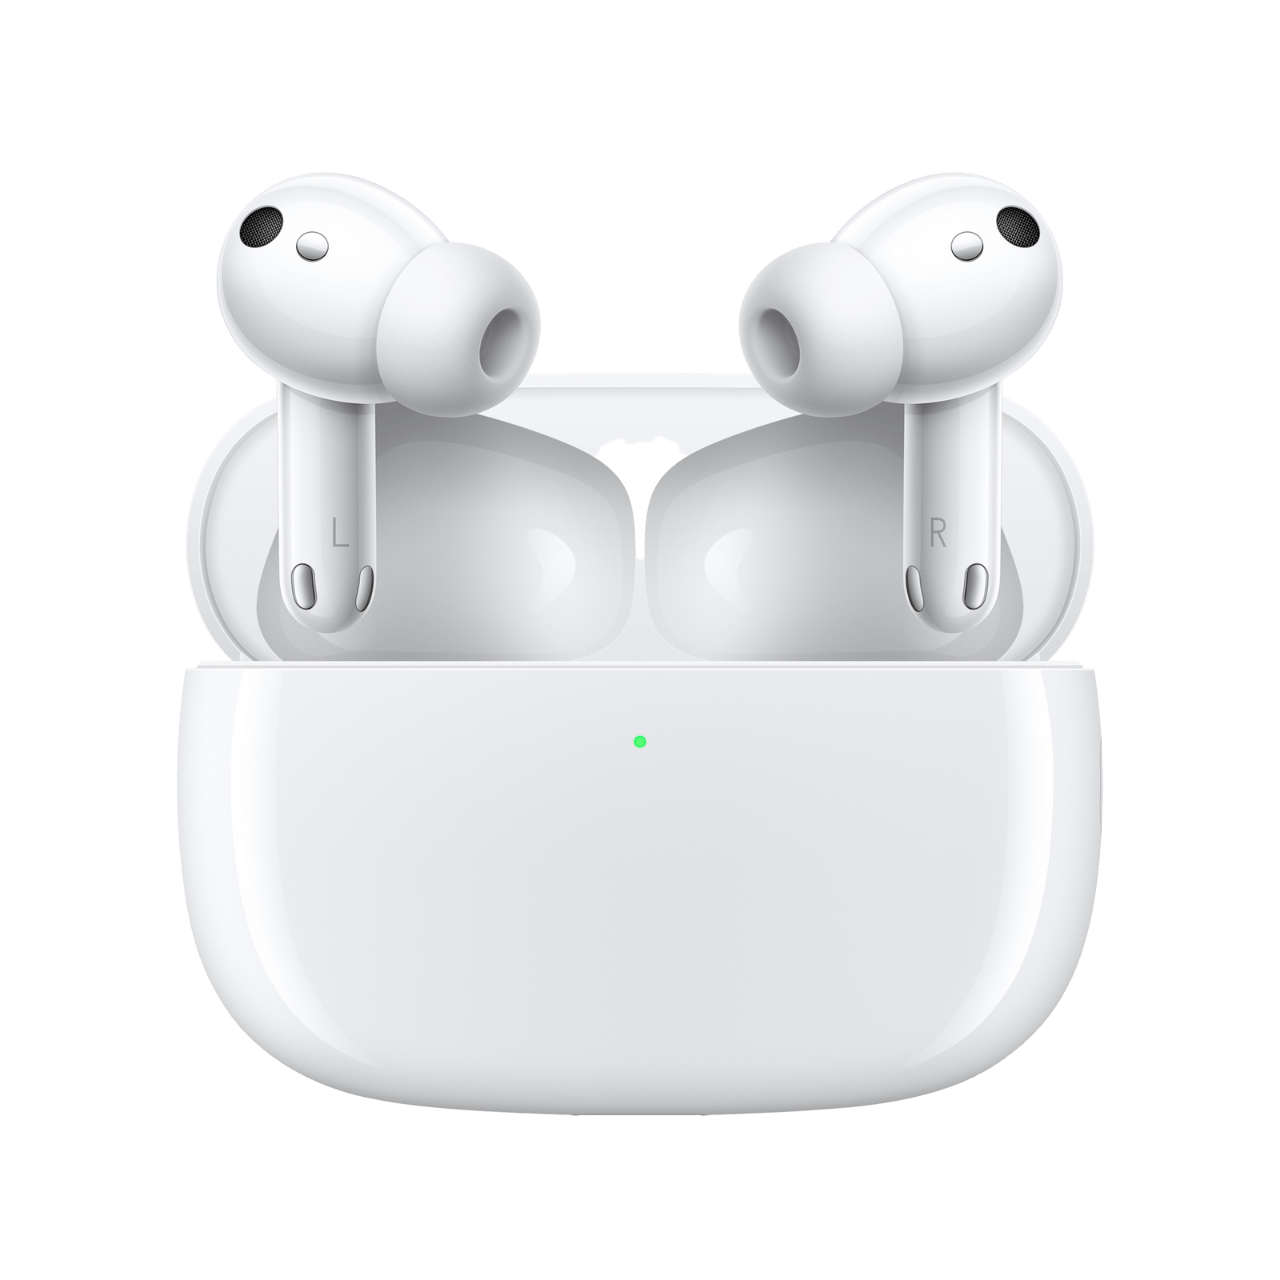 Honor Earbuds 3 Pro